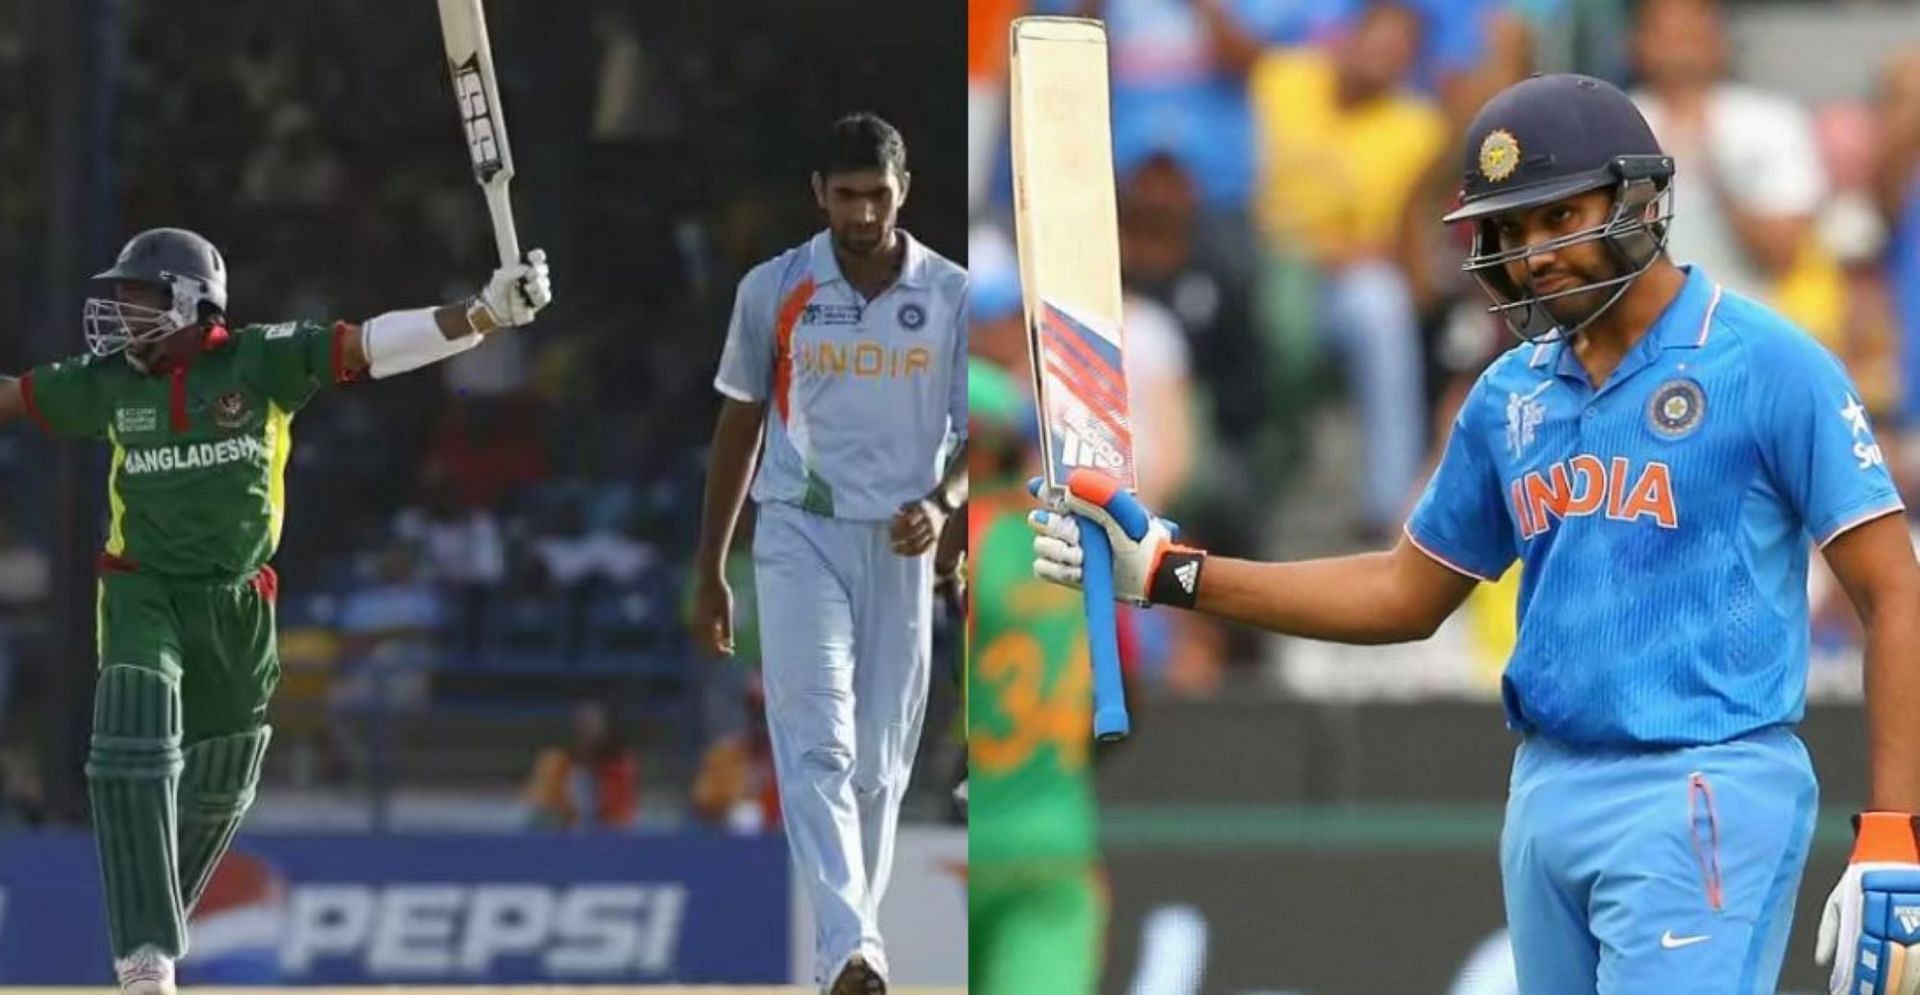 India and Bangladesh have provided some tension-filled World Cup encounters